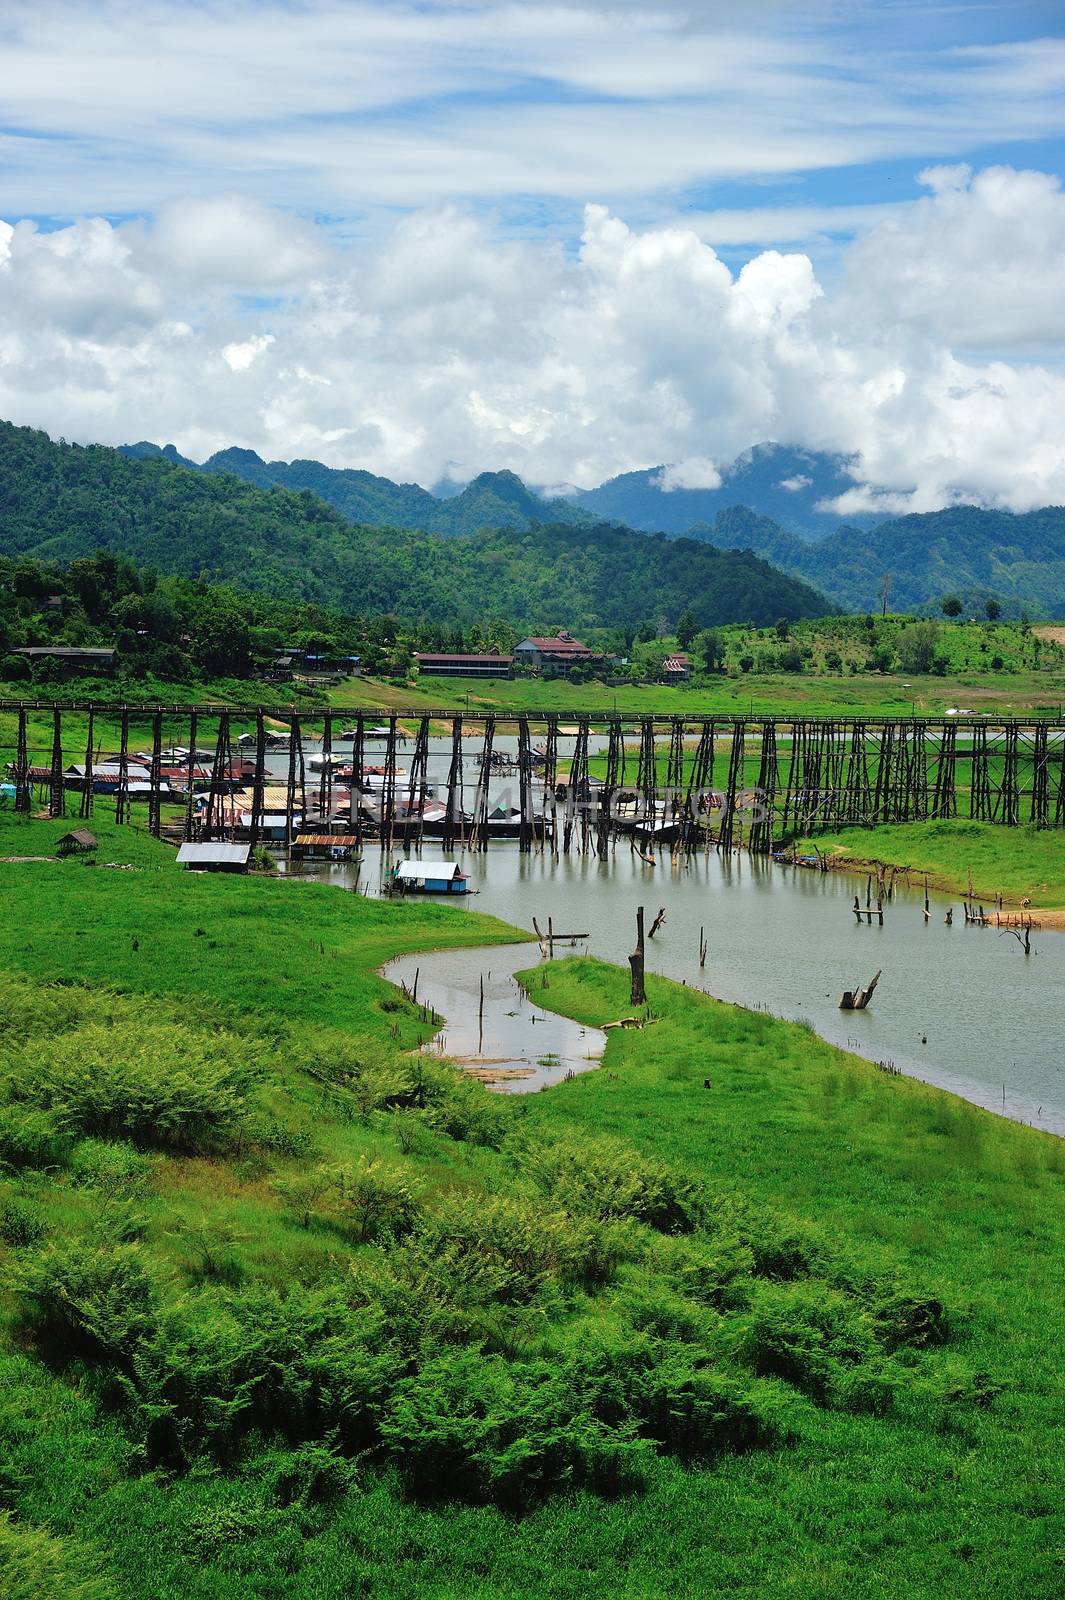 Wood bridge with river and mountain in Kanchanaburi Thailand by think4photop